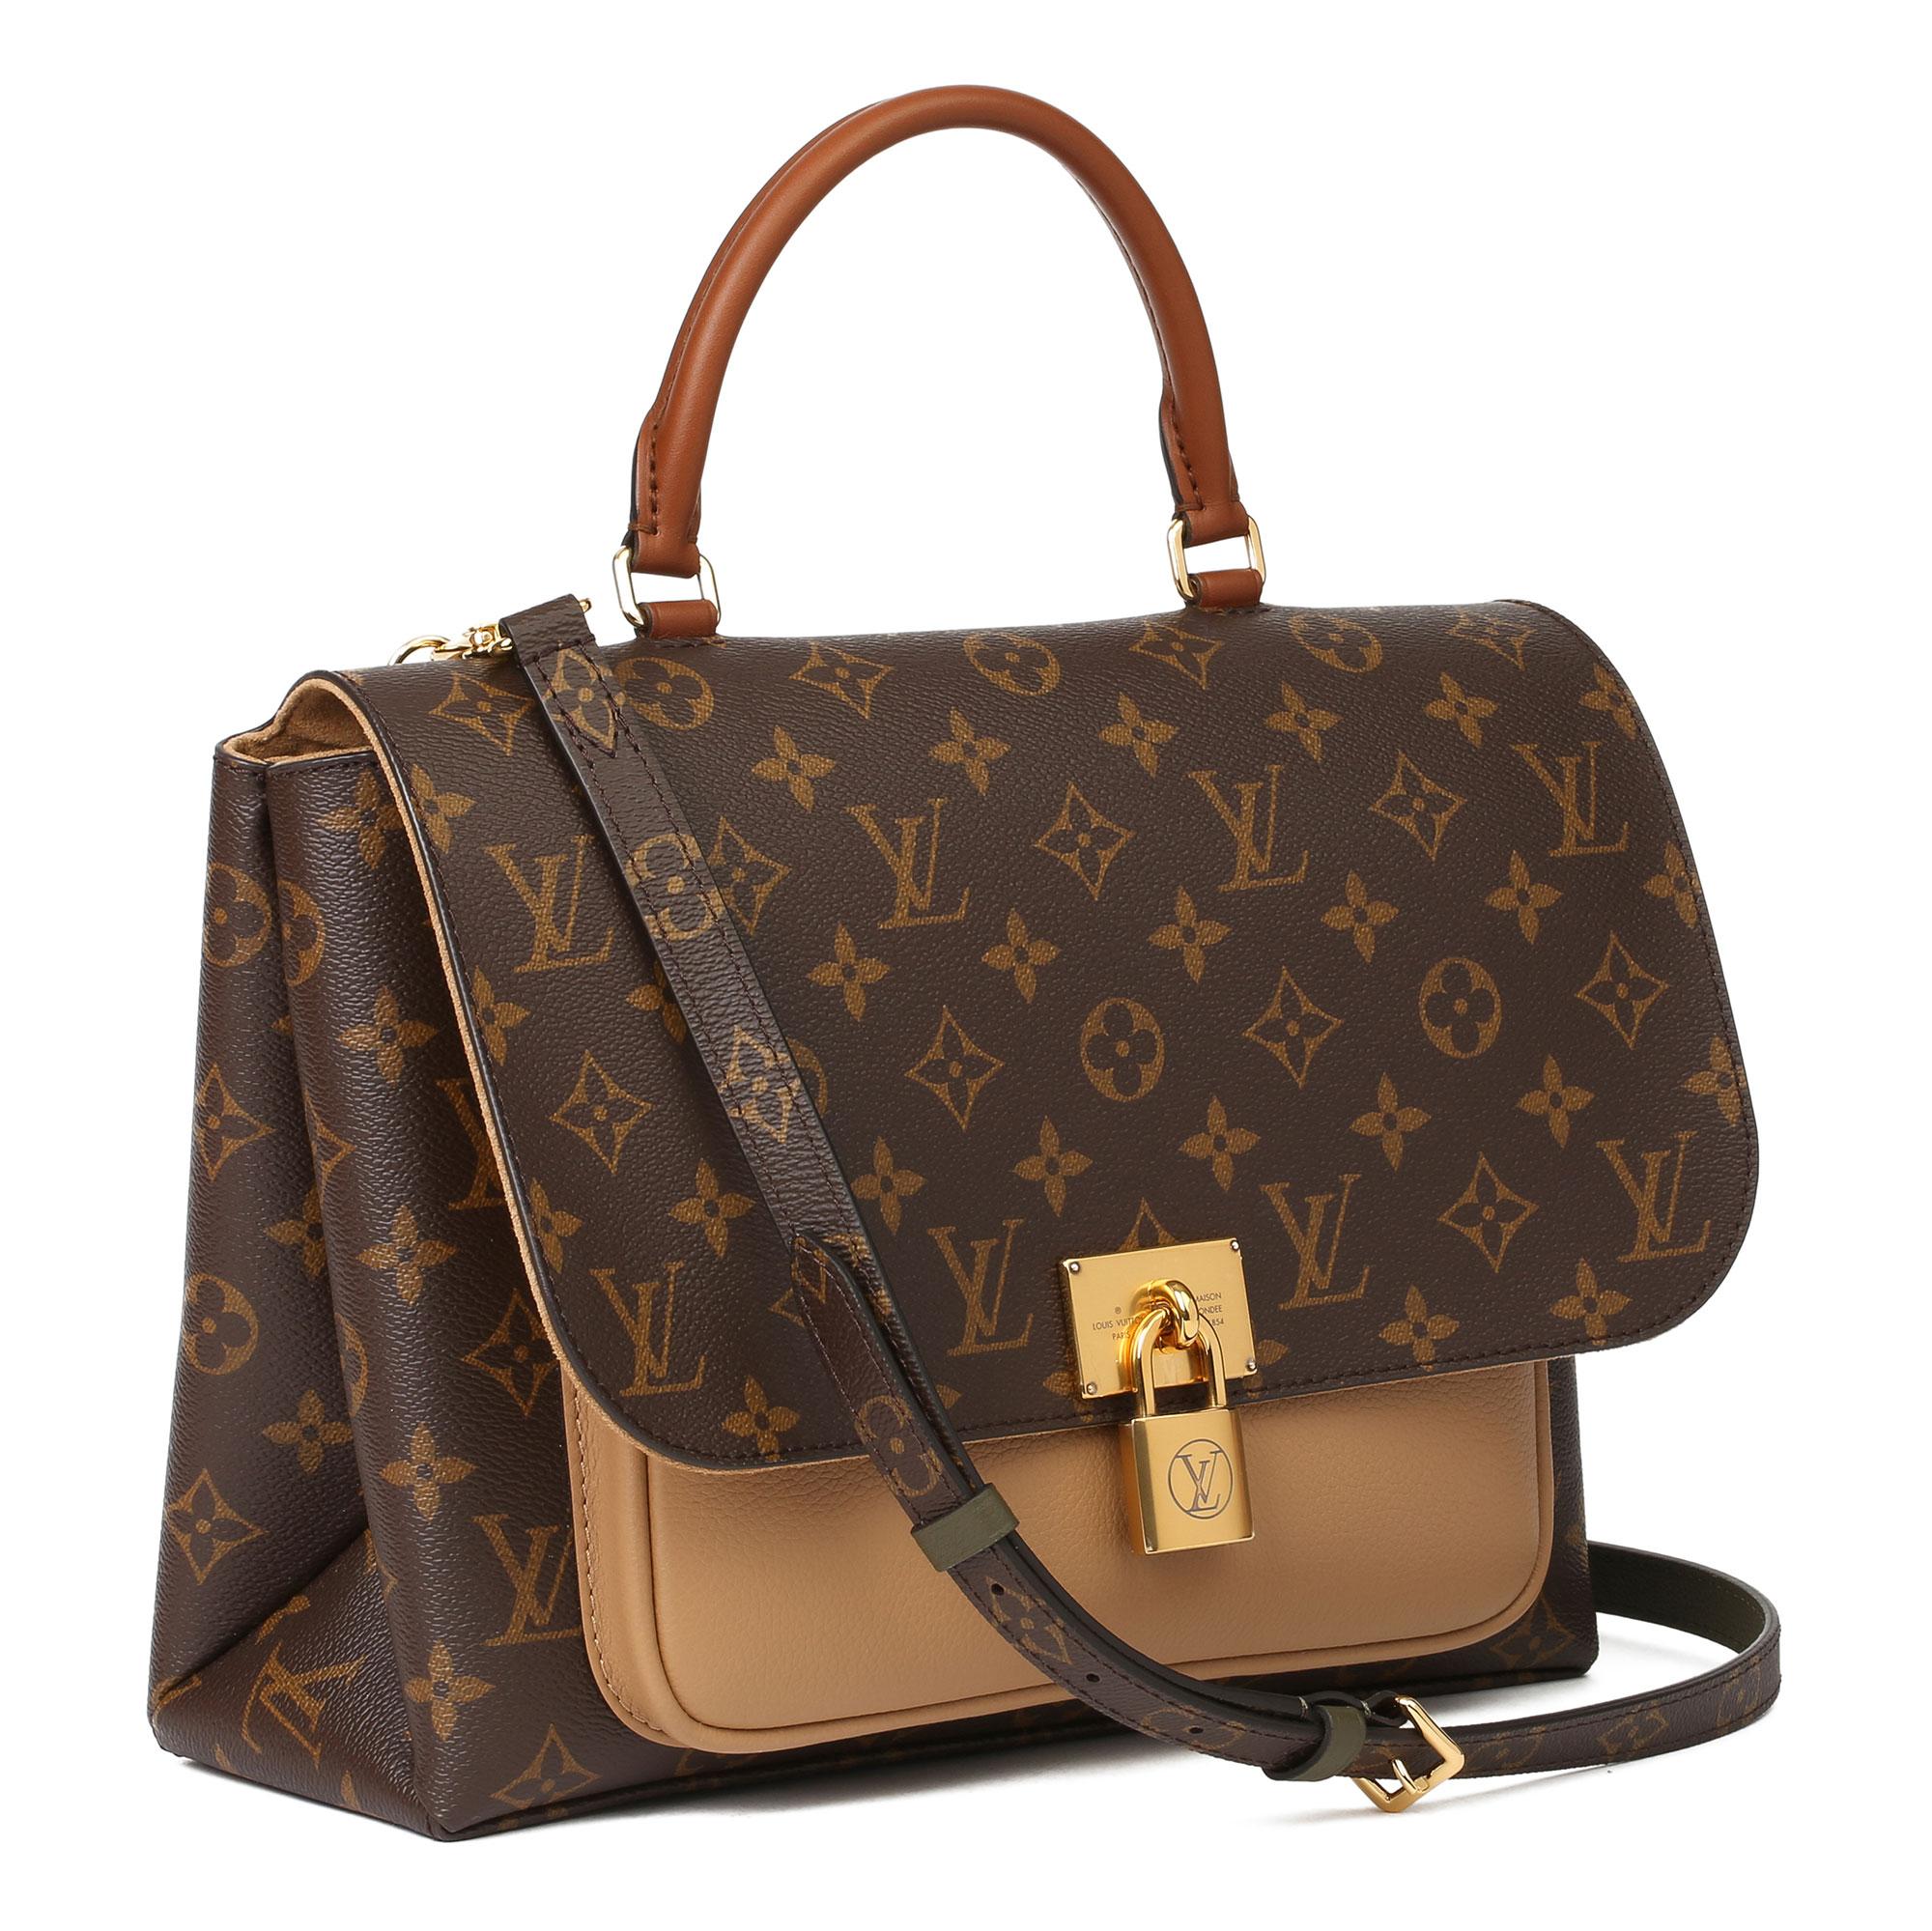 LOUIS VUITTON
Brown Monogram Coated Canvas, Sesame Grained Calfskin & Tan Cowhide Marignan

Xupes Reference: CB281
Serial Number: AR3169
Age (Circa): 2019
Accompanied By: Louis Vuitton Dust Bag, Box, Care Booklet, Shoulder Strap
Authenticity